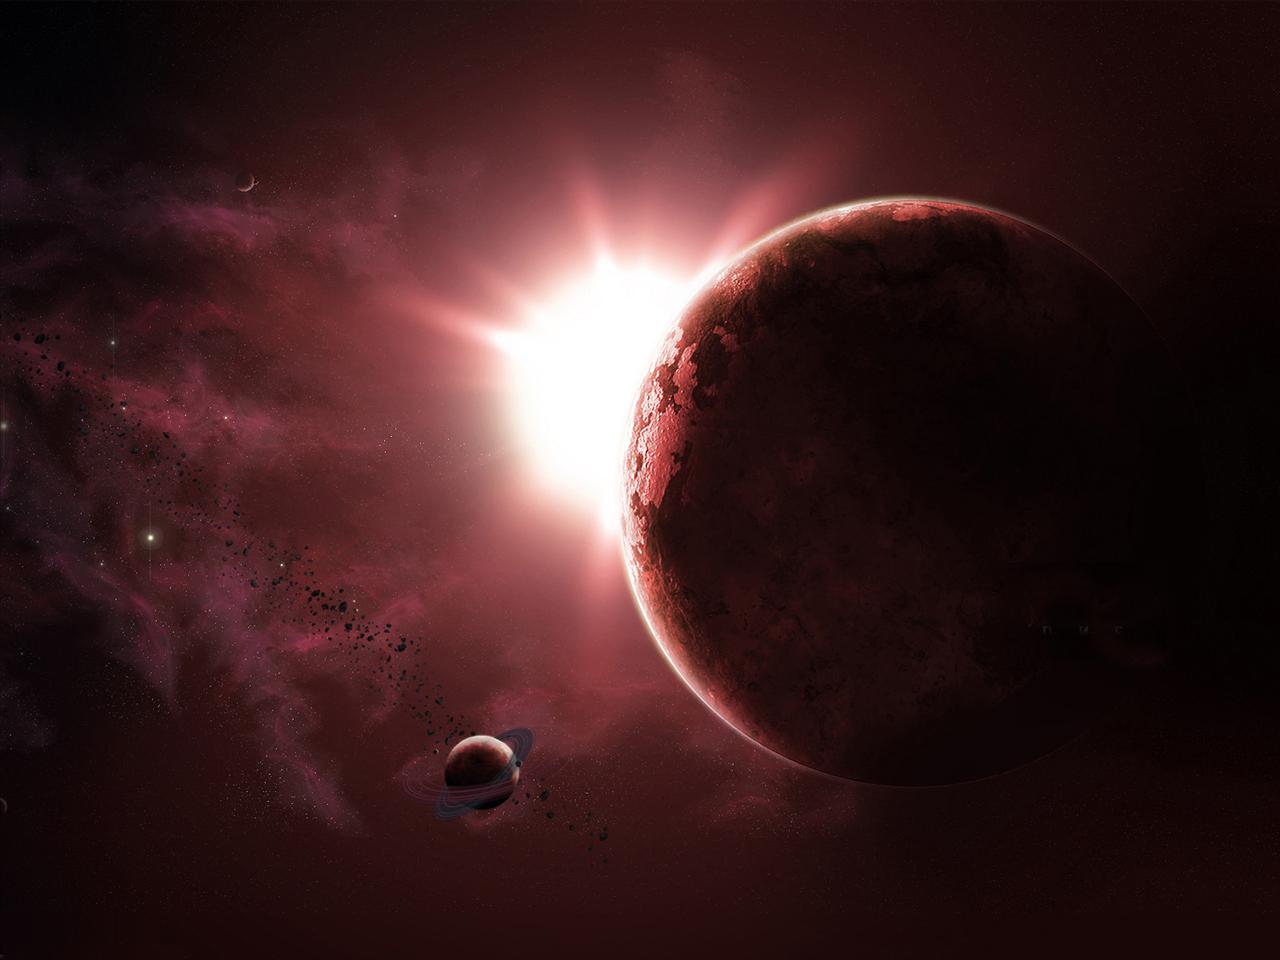 Astronomia - Space Art Wallpapers 07.jpg